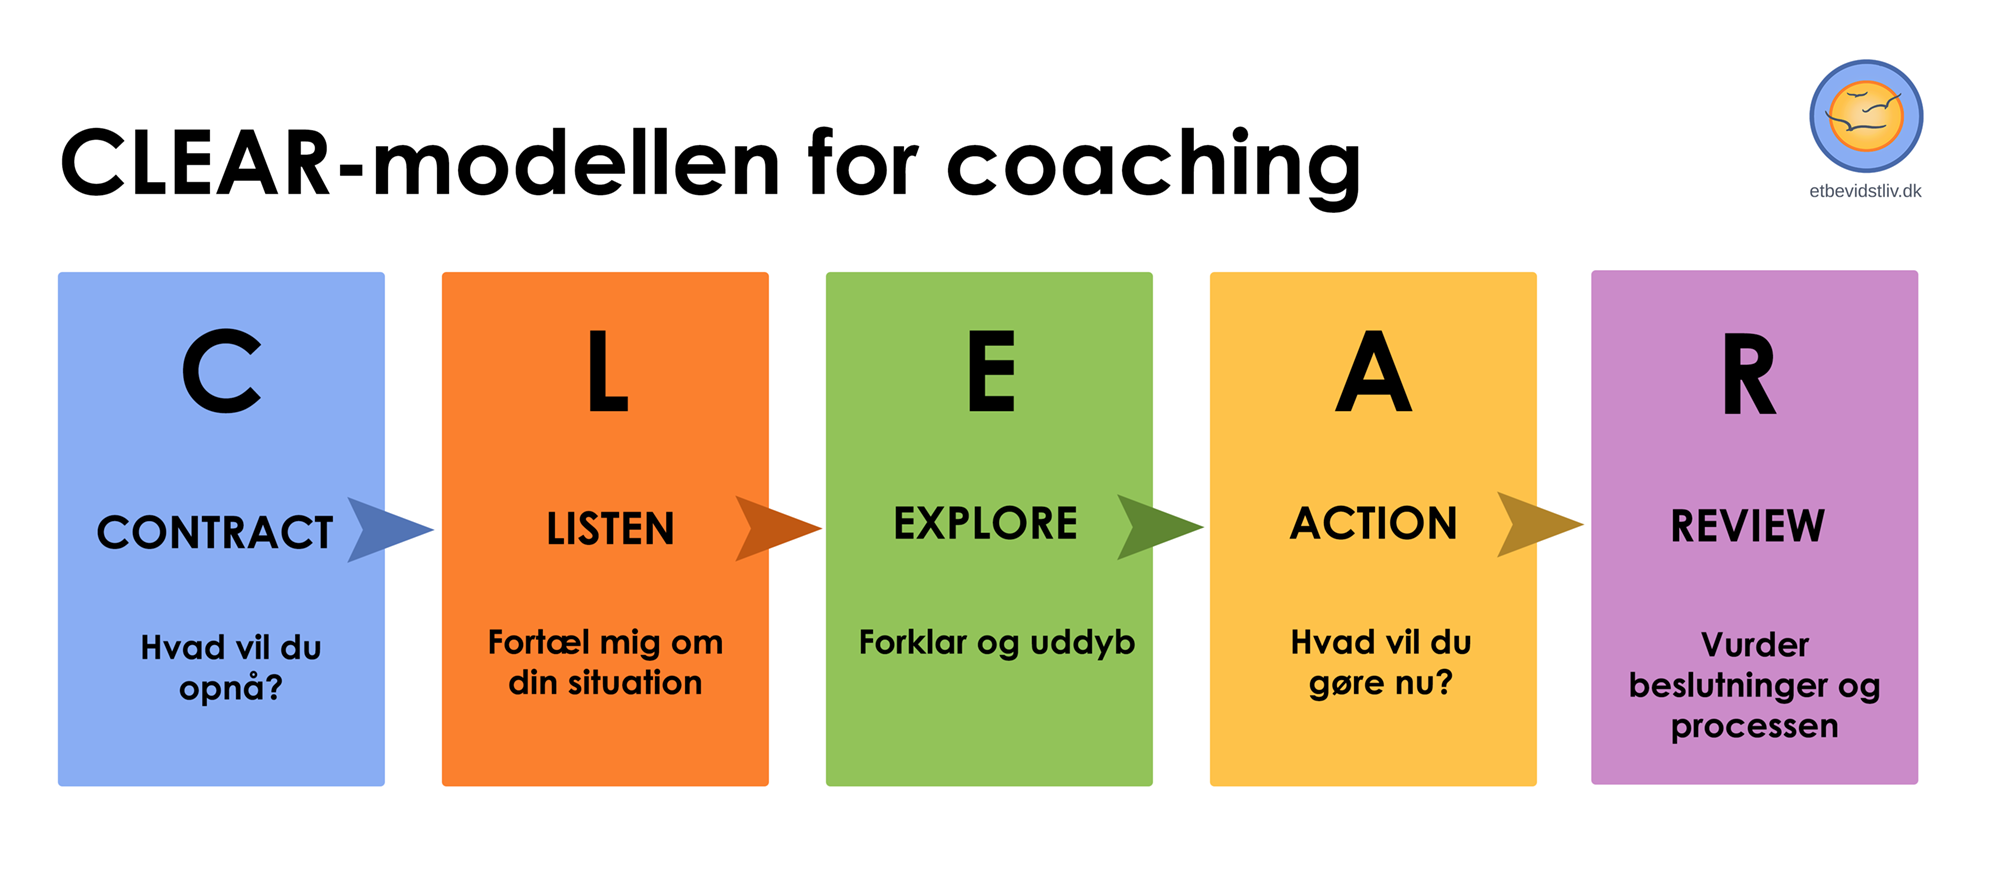 CLEAR model for coaching.